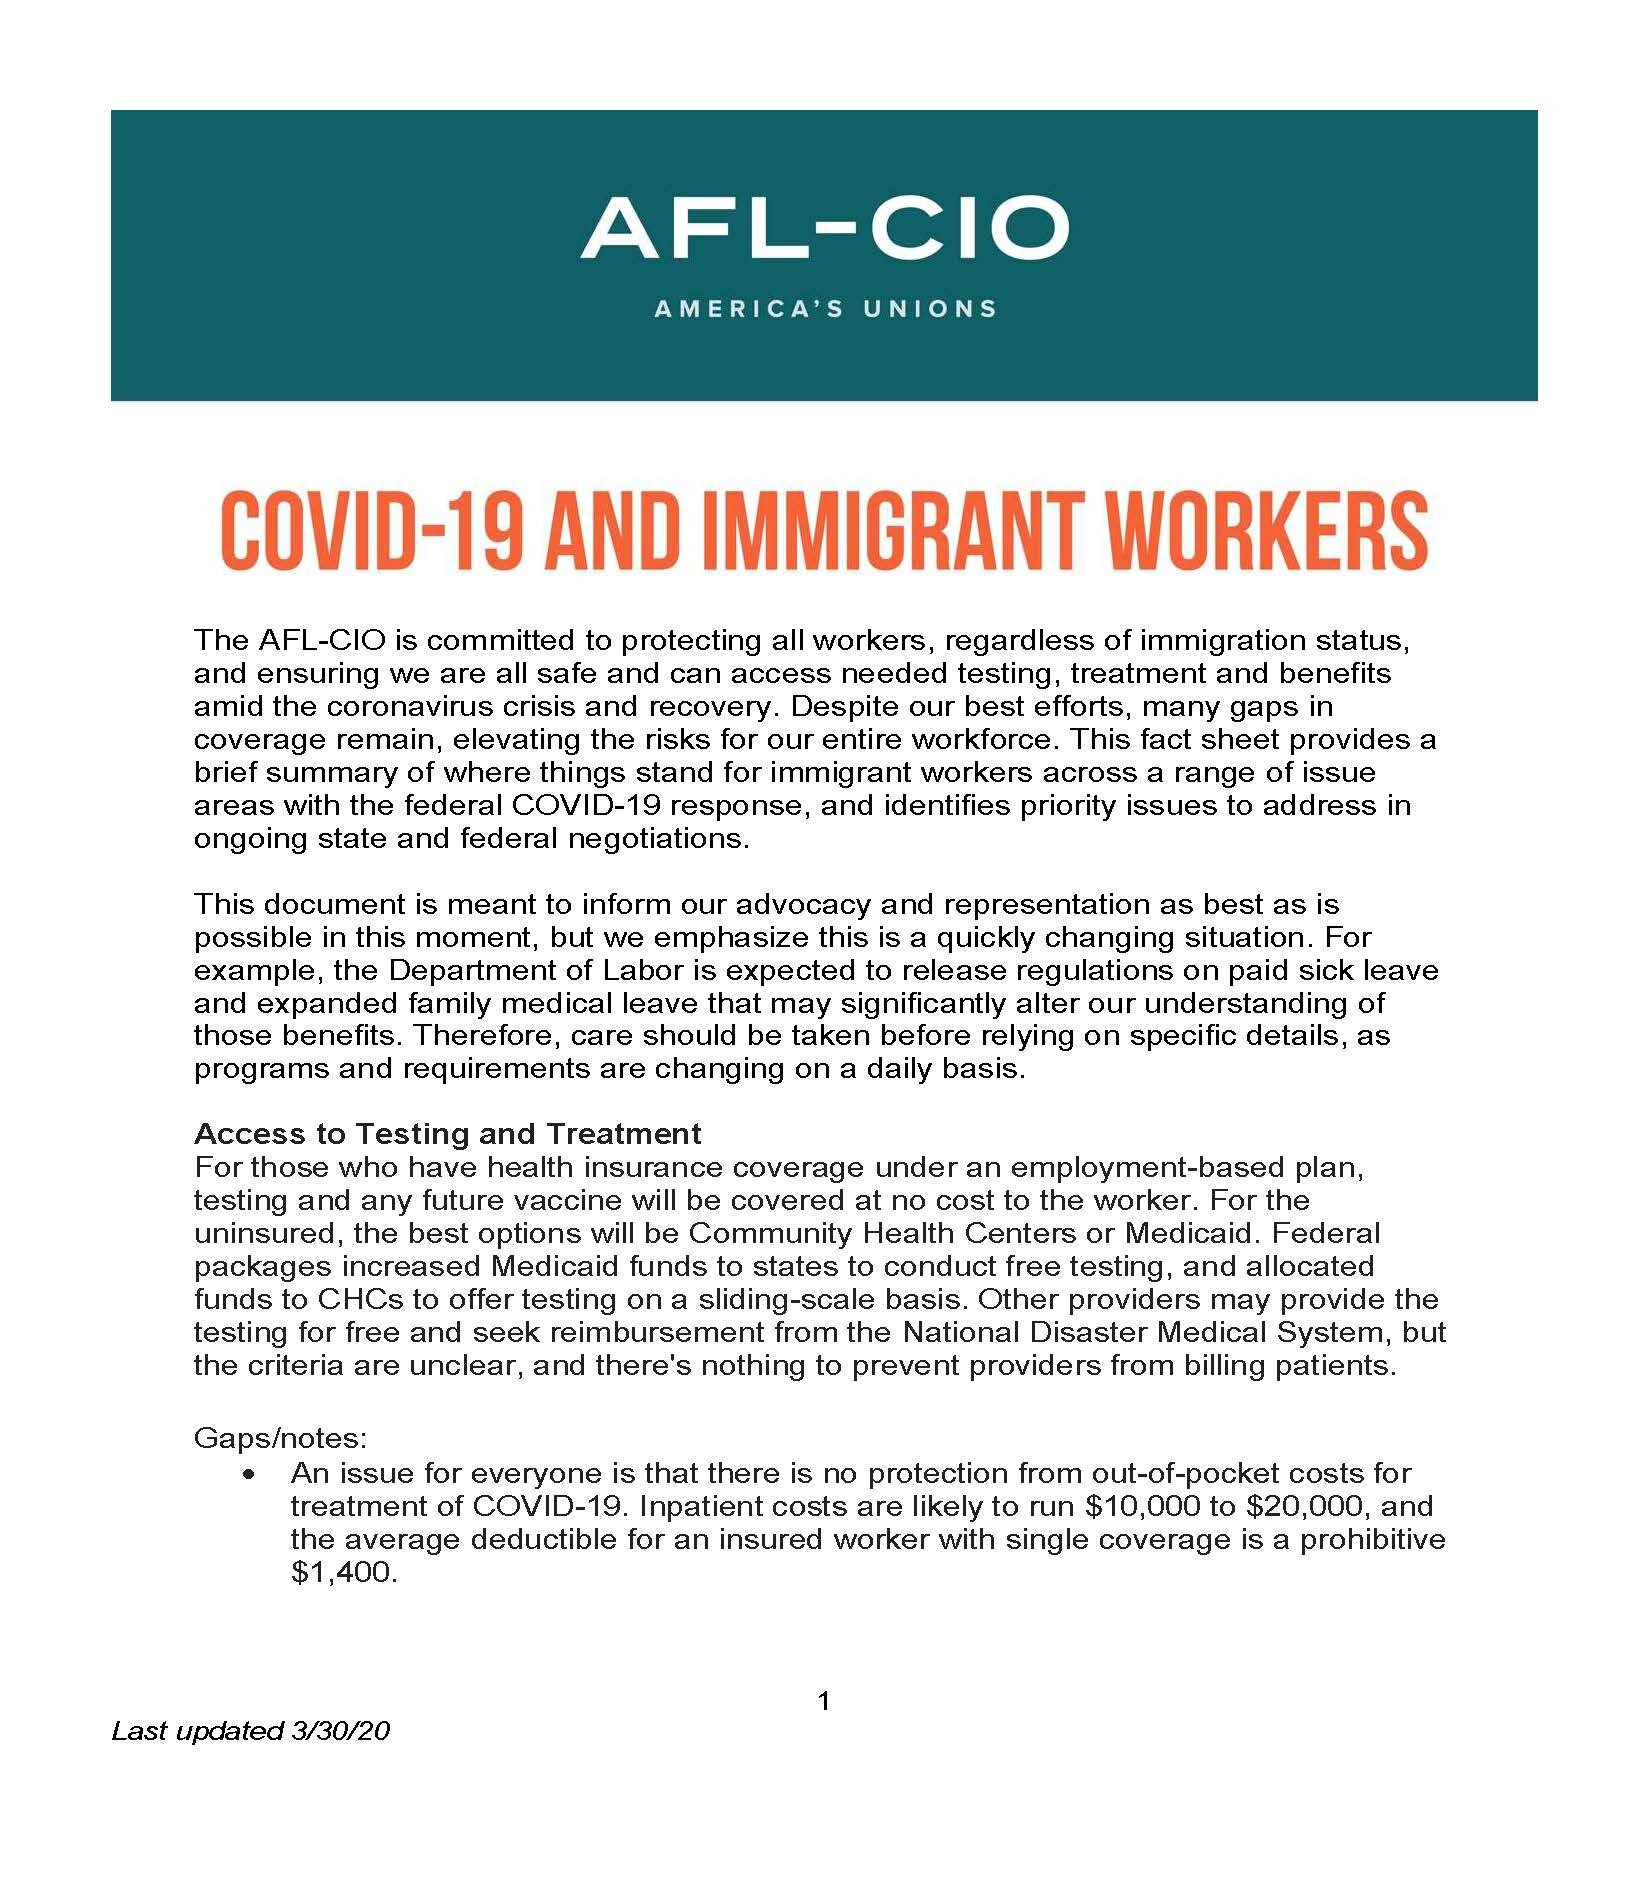 AFL-CIO-COVID-19-and-Immigrant-Workers-Fact-Sheet_Page_1.jpg